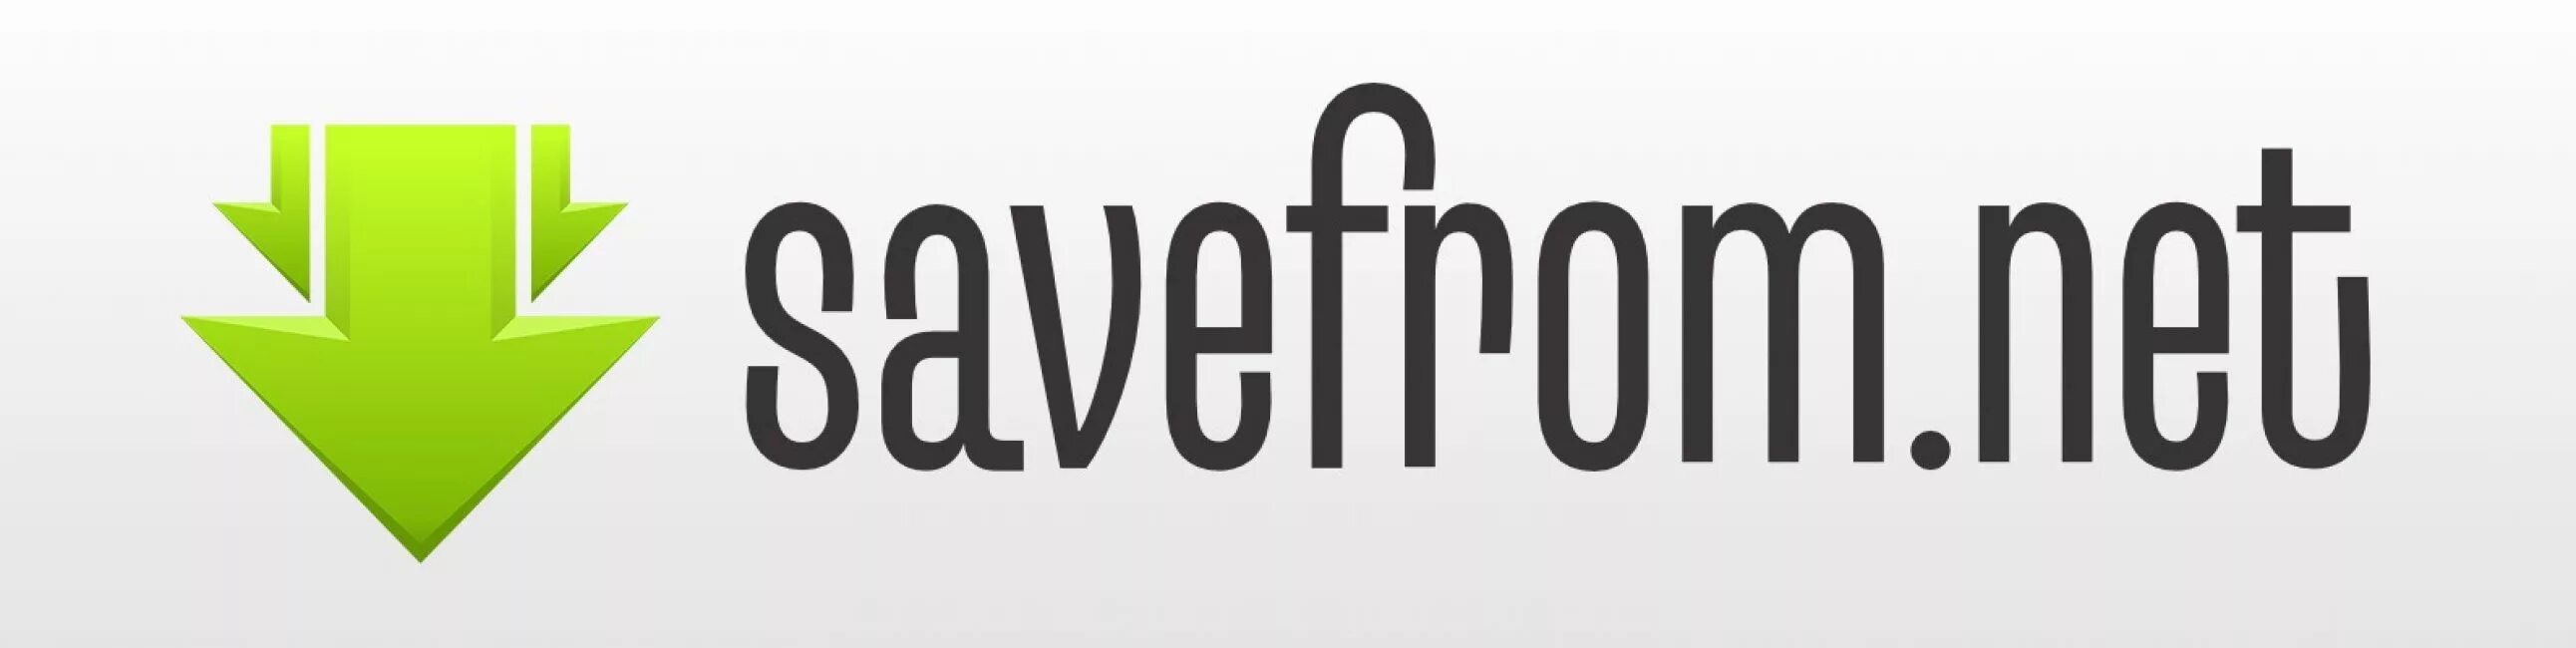 Sevefrome net. Savefrom. Savefrom.net иконка. Savefrom логотип. Safe from.